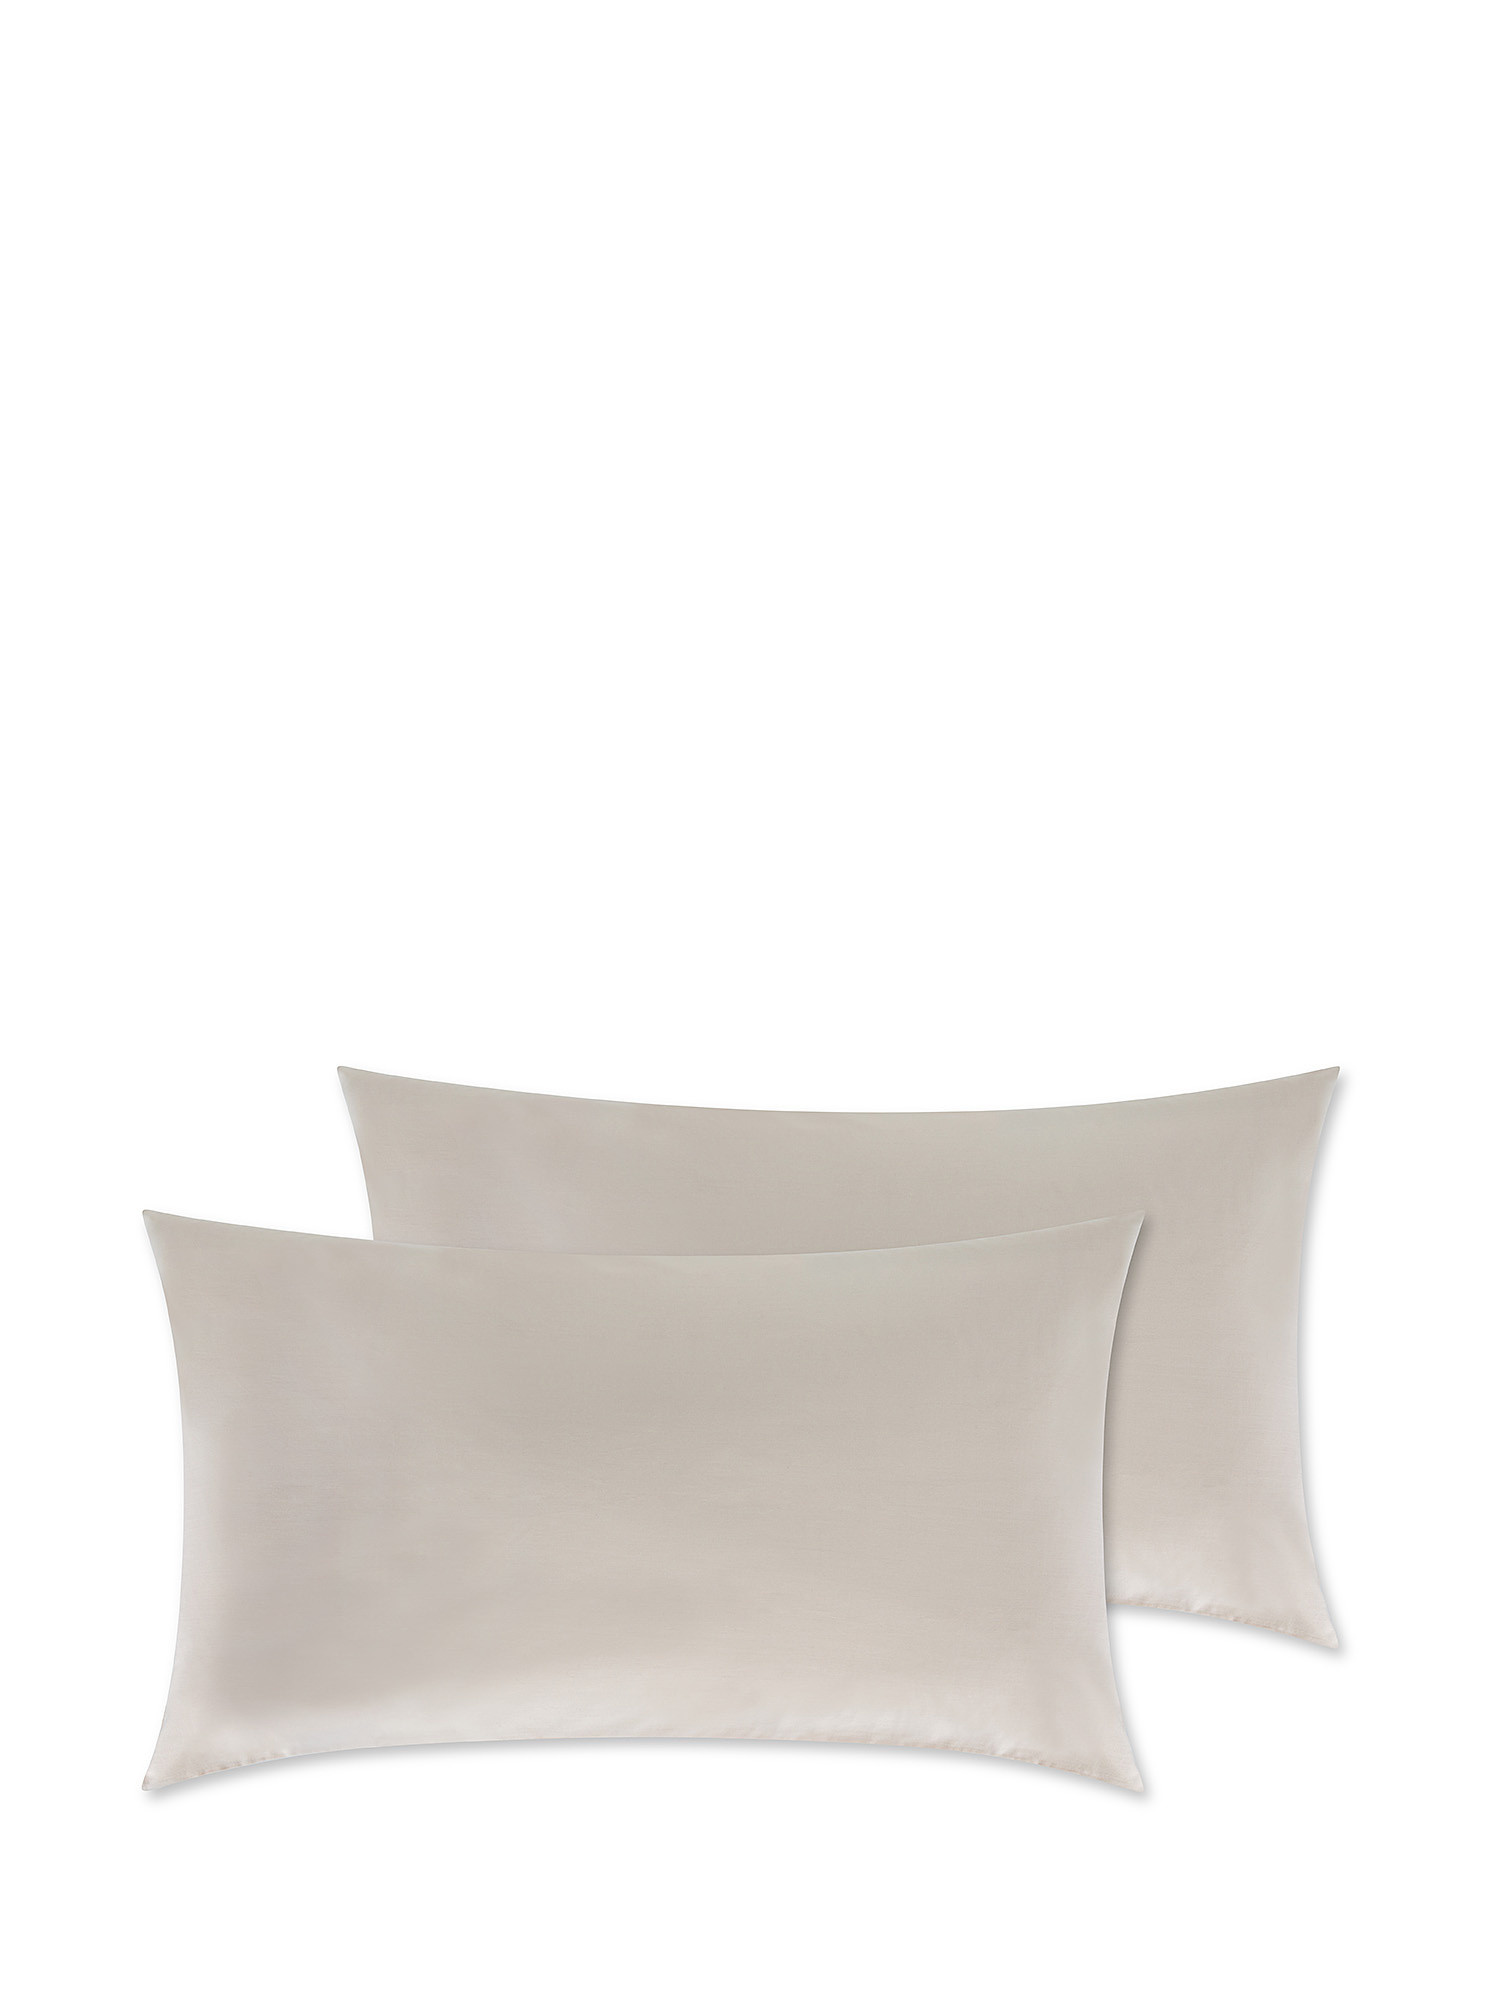 Set of 2 percale cotton pillowcases, White Milk, large image number 0